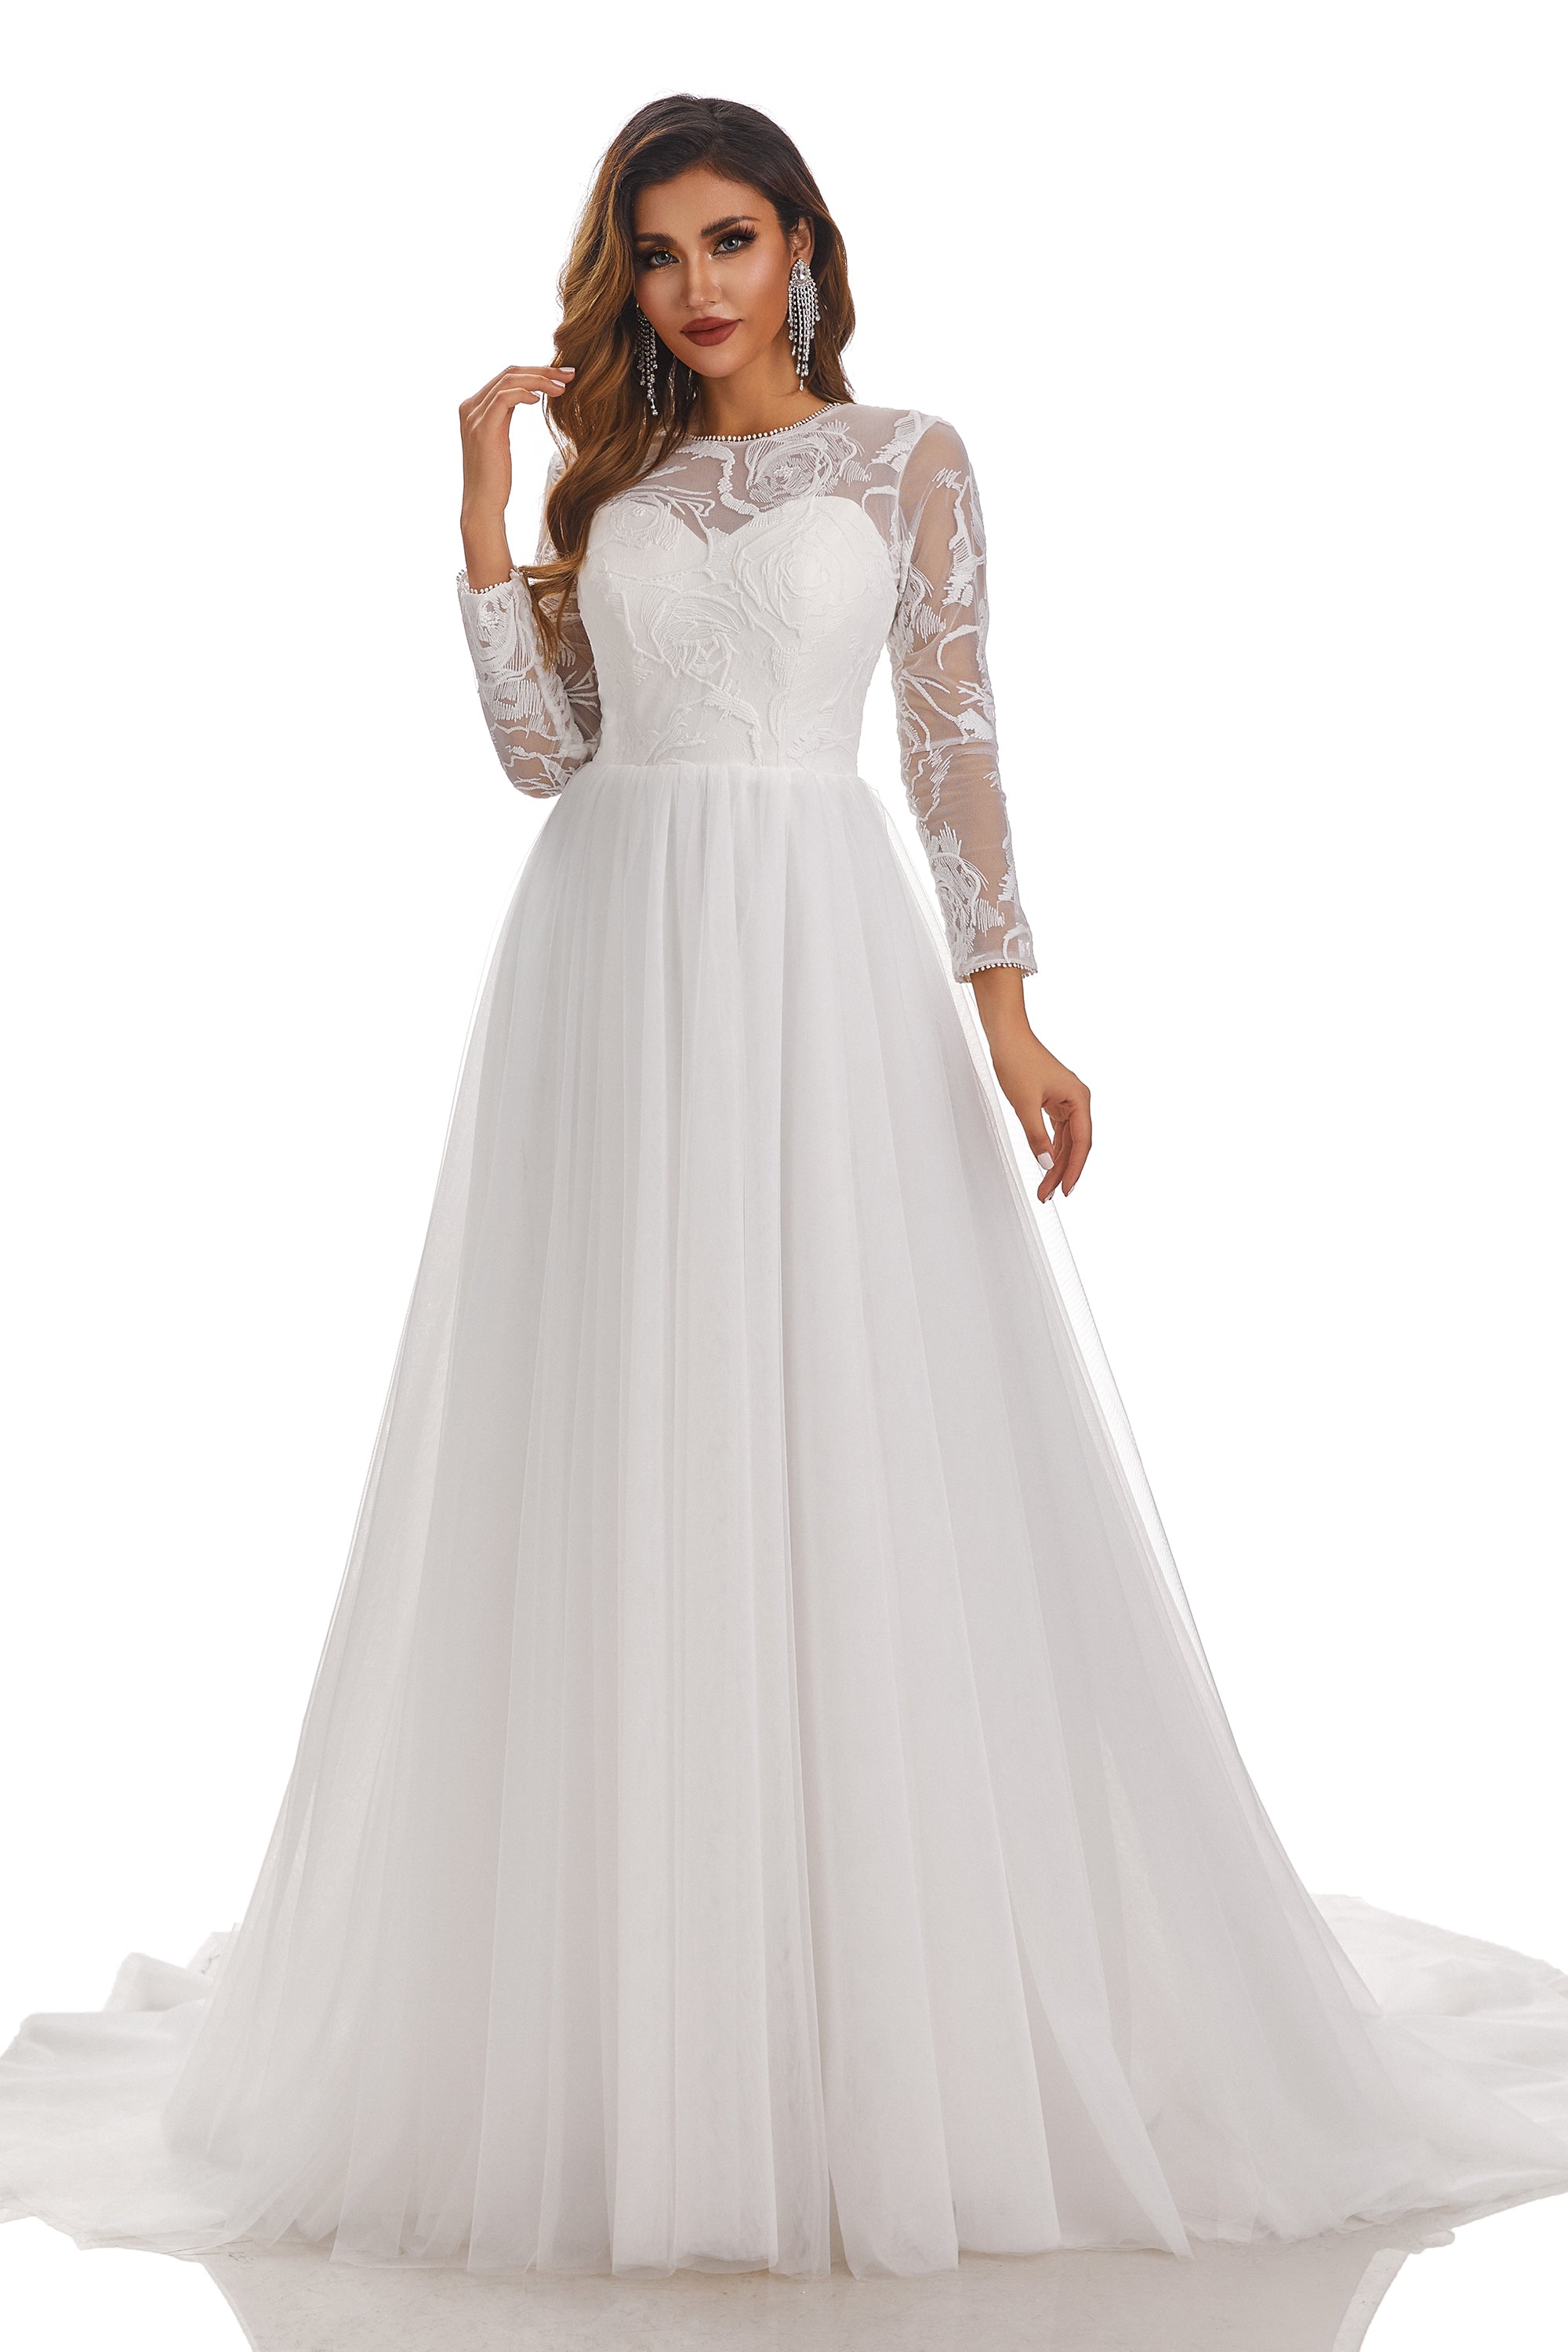 A-Line Round Neck Long Sleeves Tulle Wedding Dress With Lace Appliques